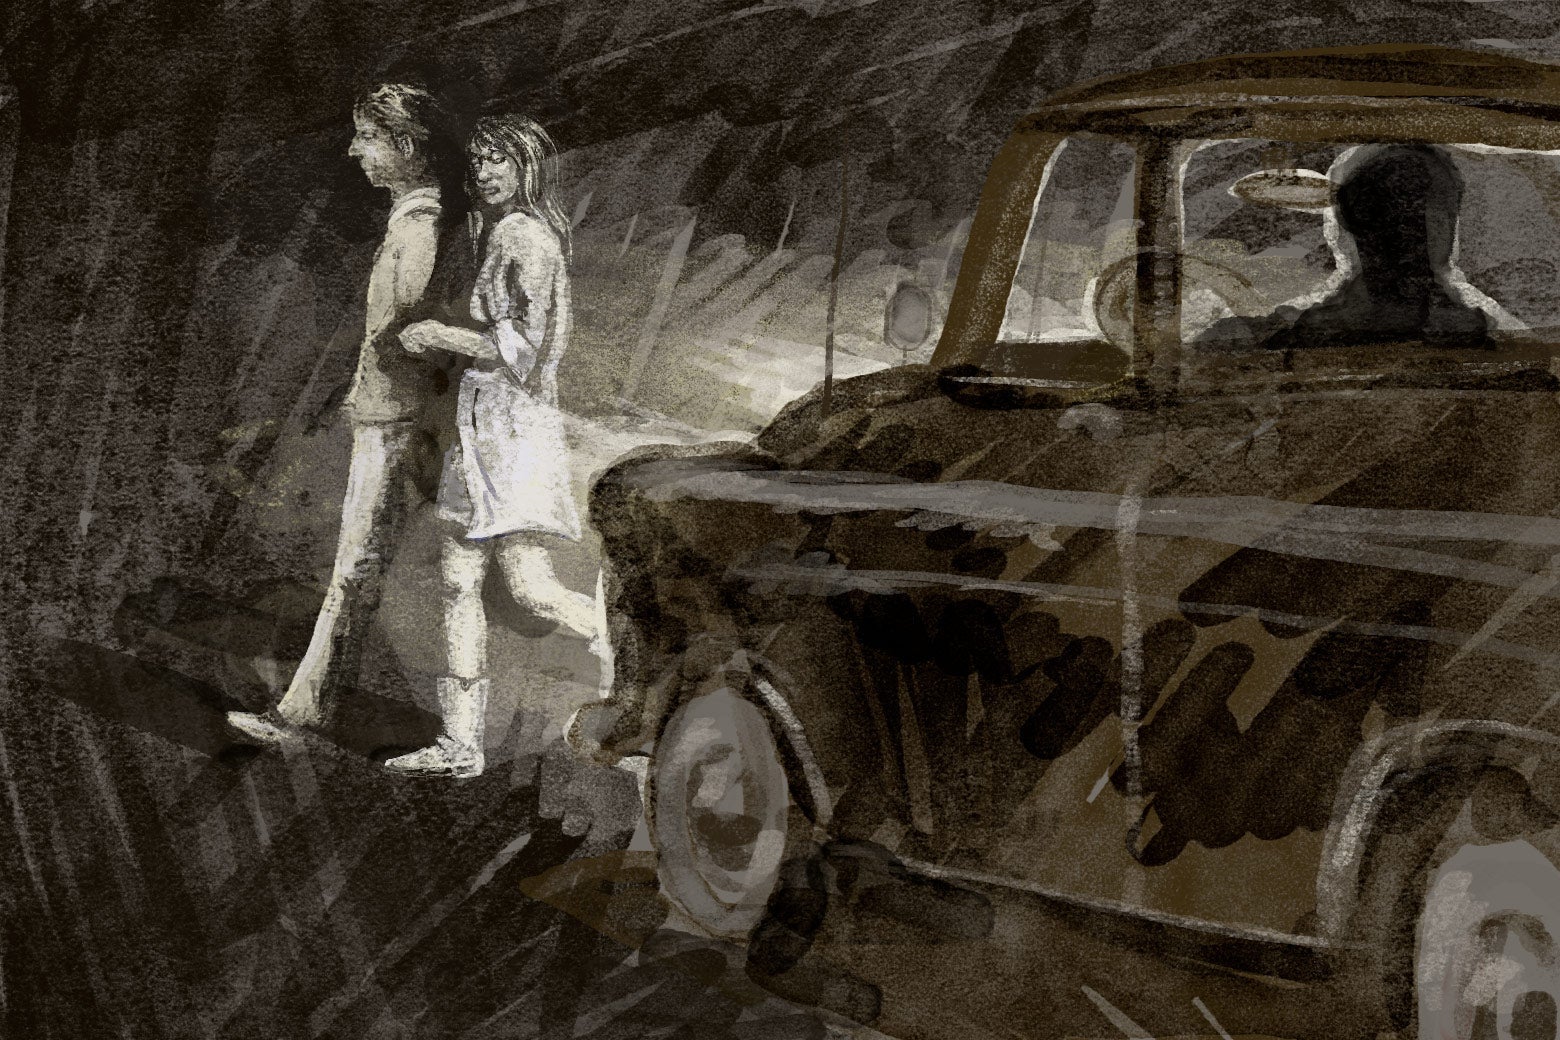 Night scene of a man and woman walking in the headlights of a truck driven by a man in shadow. Only the woman turns back to look at the truck.